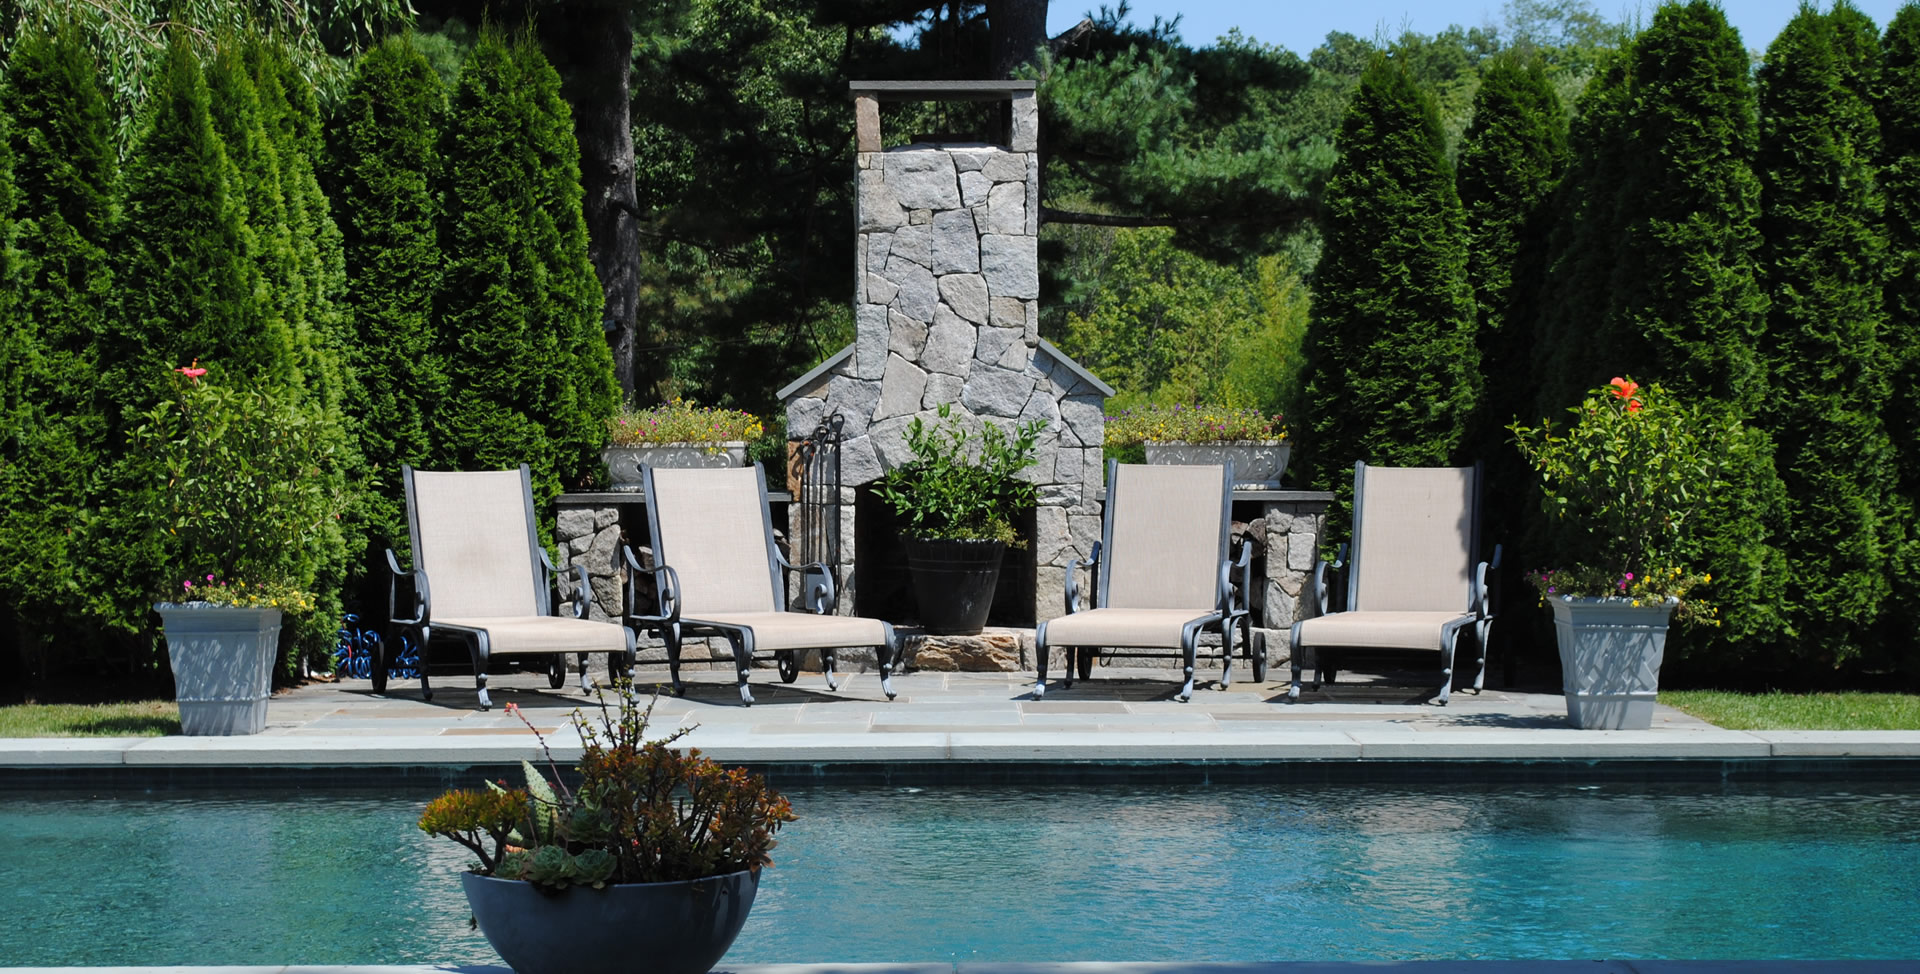 Town & Country Landscape Management is a full-service landscape company serving CT and NY.